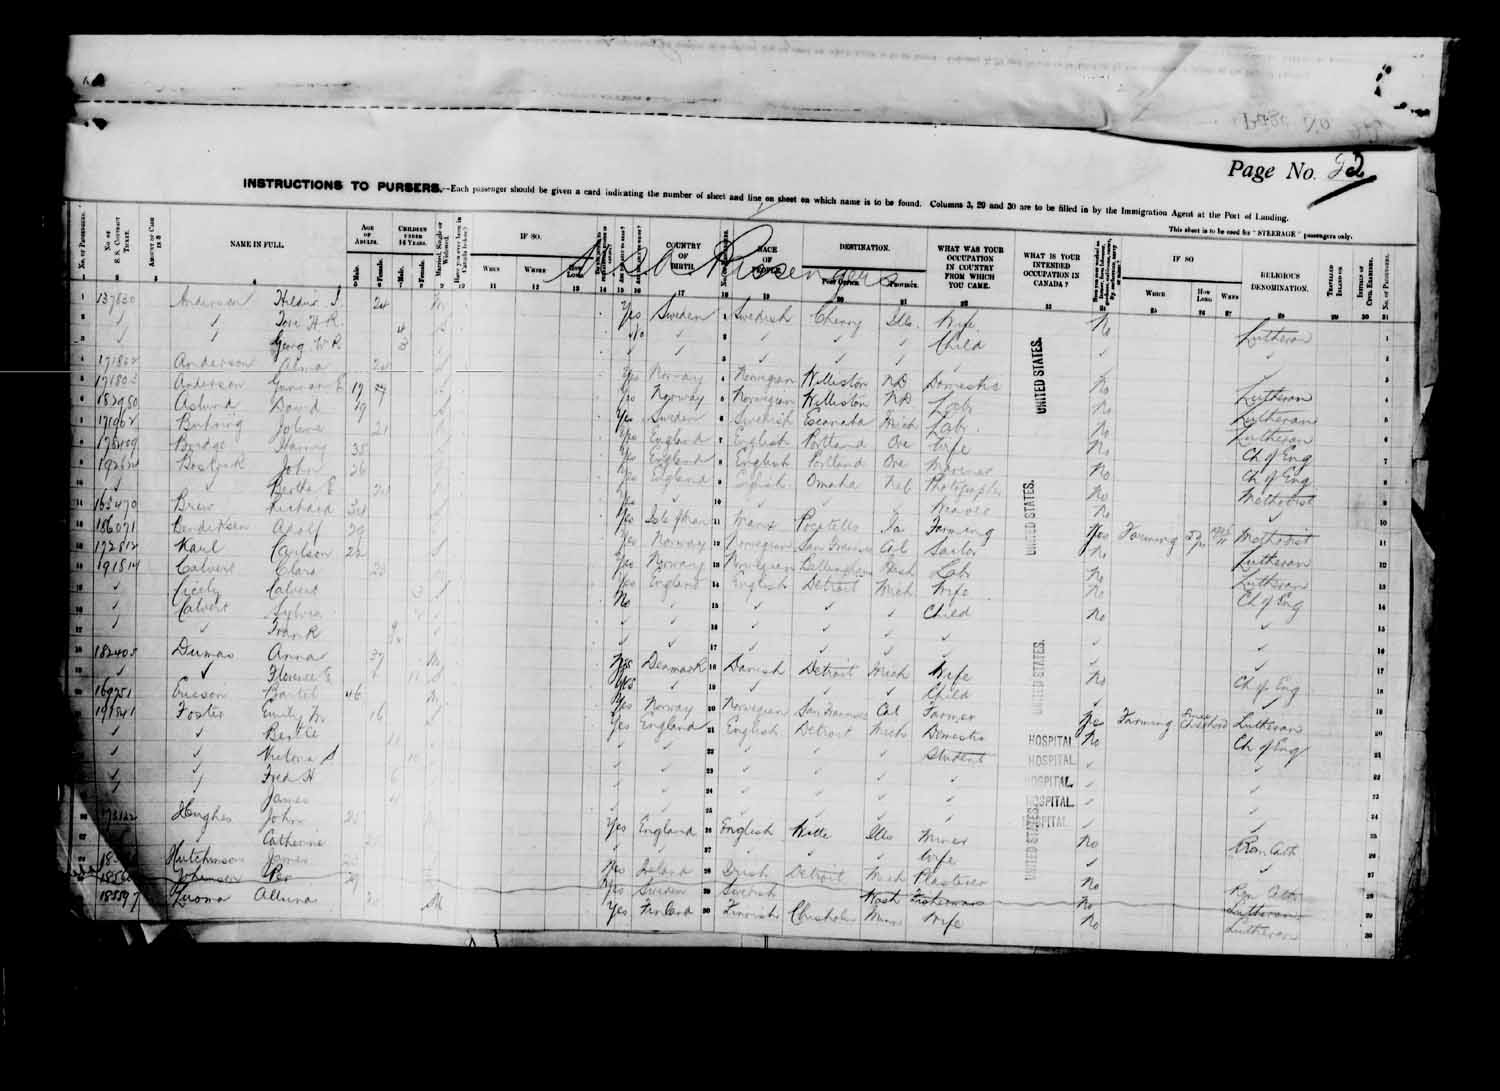 Digitized page of Passenger Lists for Image No.: e003627213